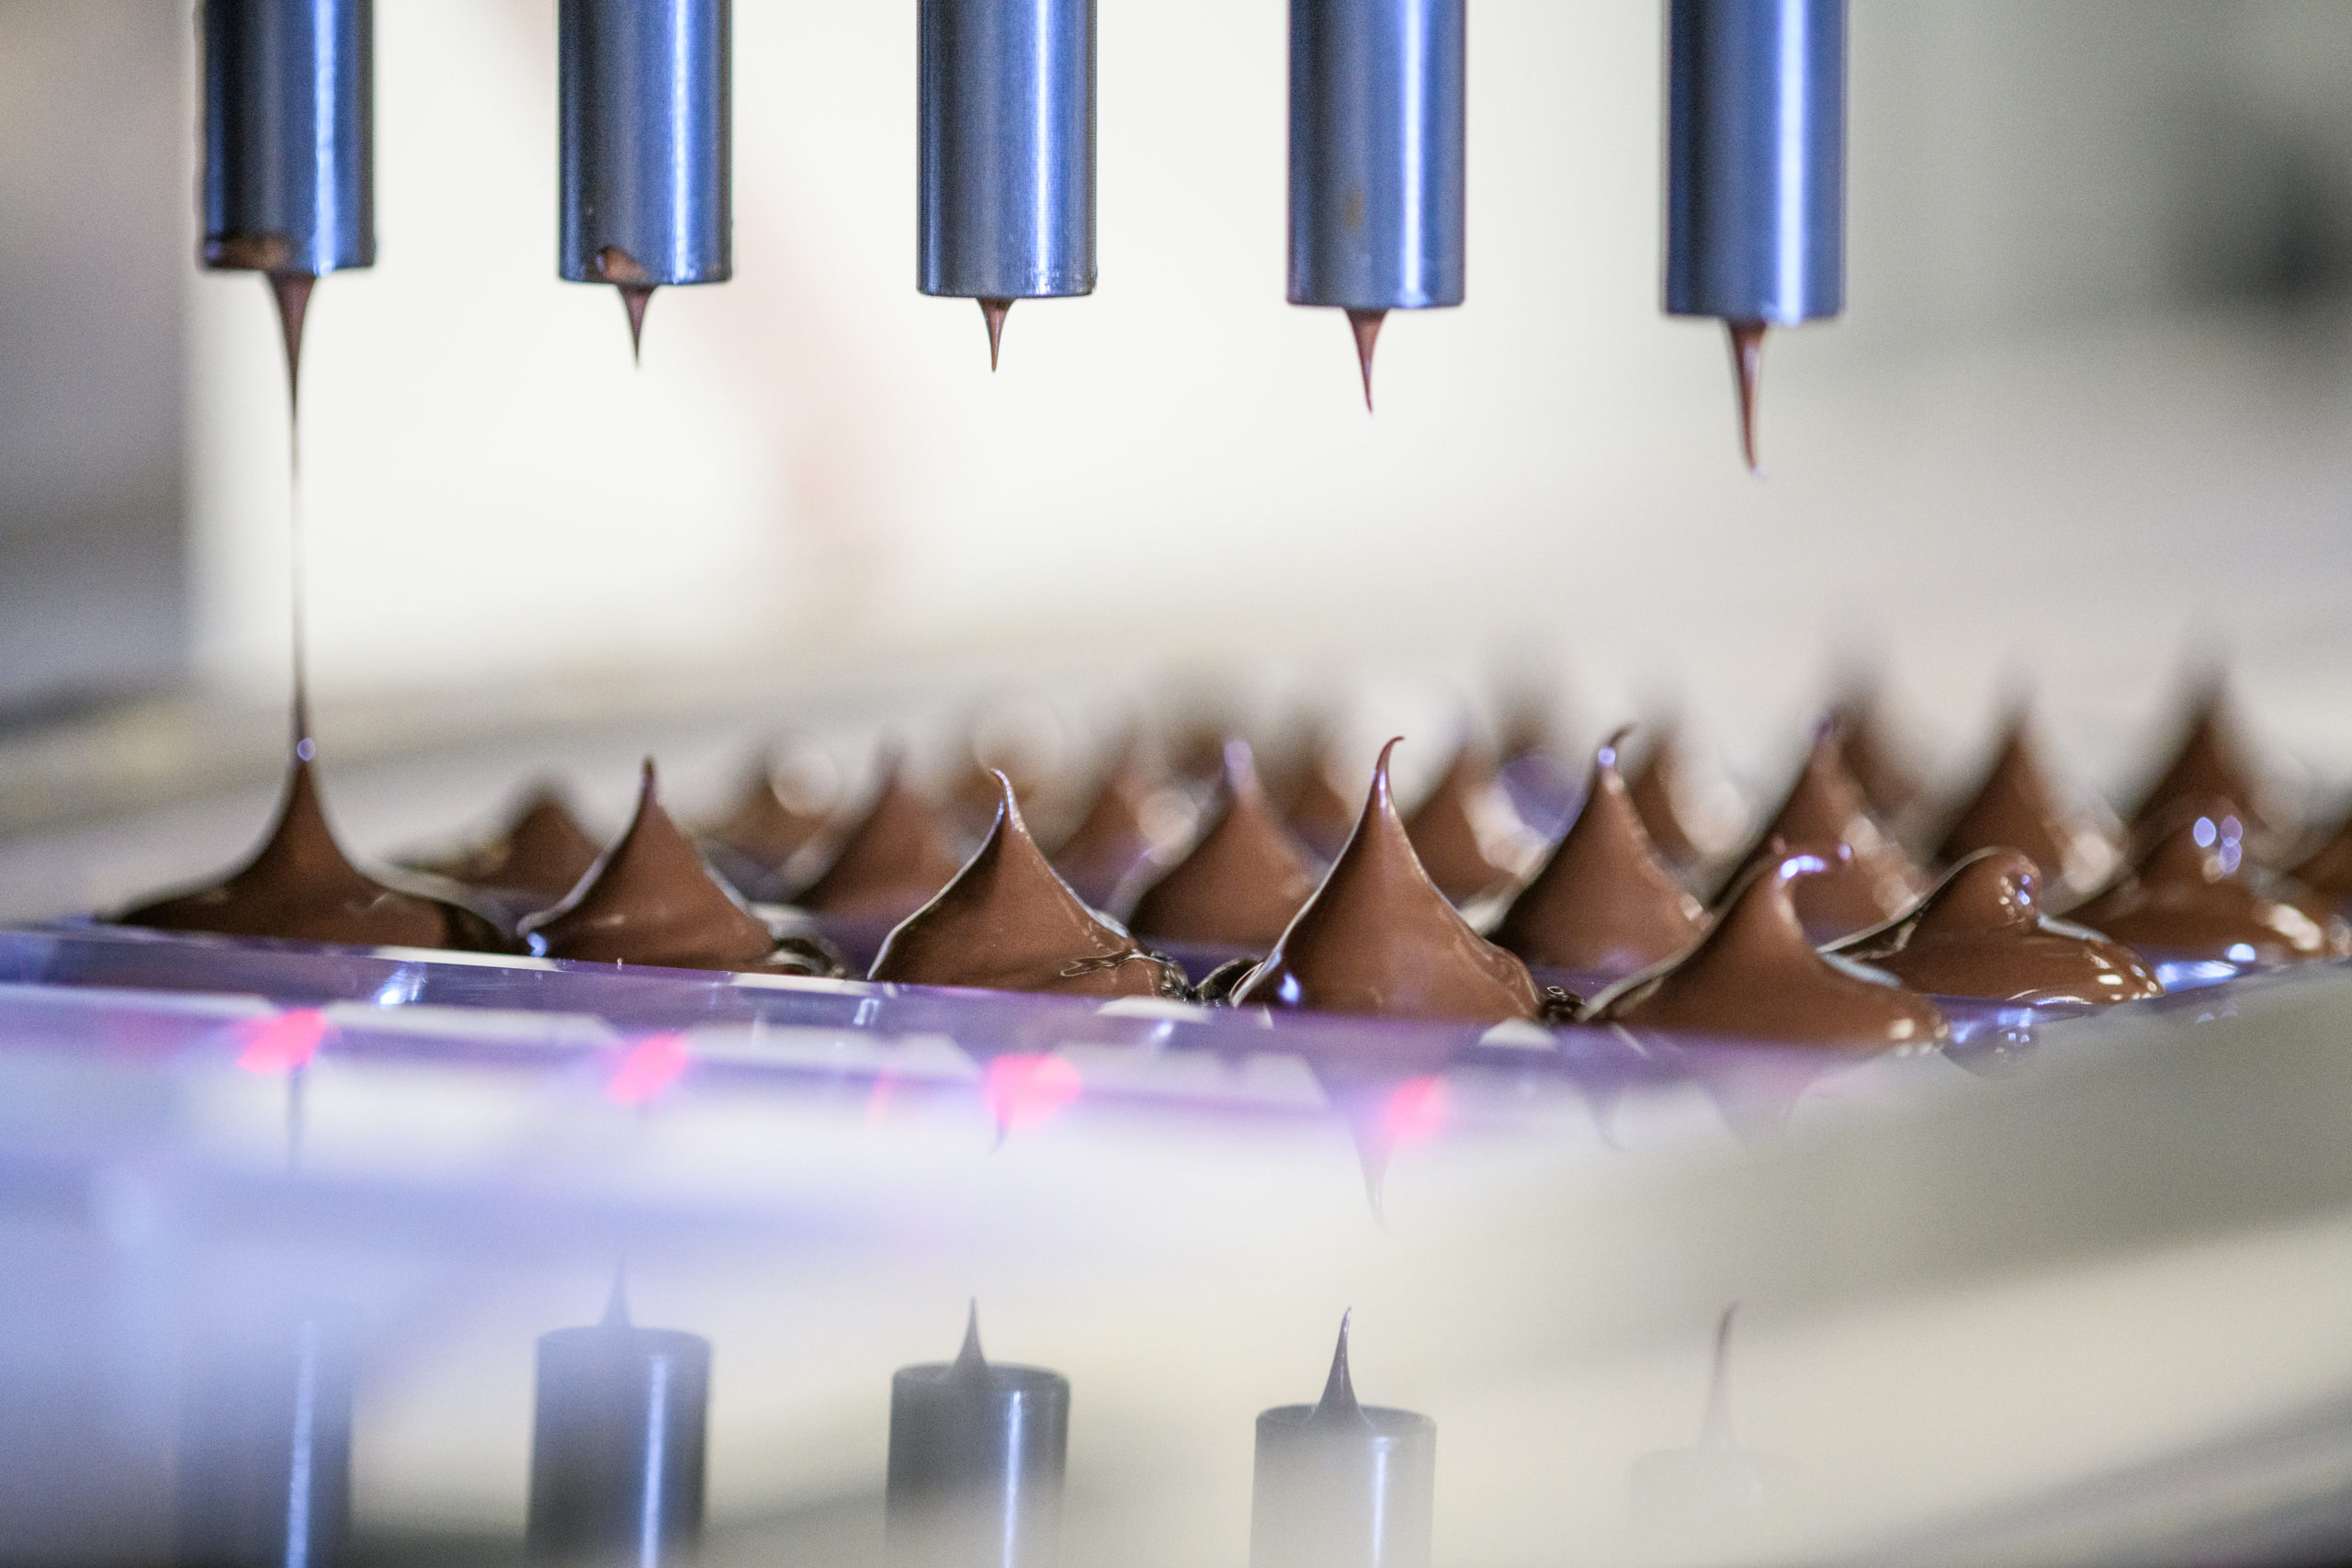 Production of Nove Luxury Chocolates; chocolates being dispensed into a mold.